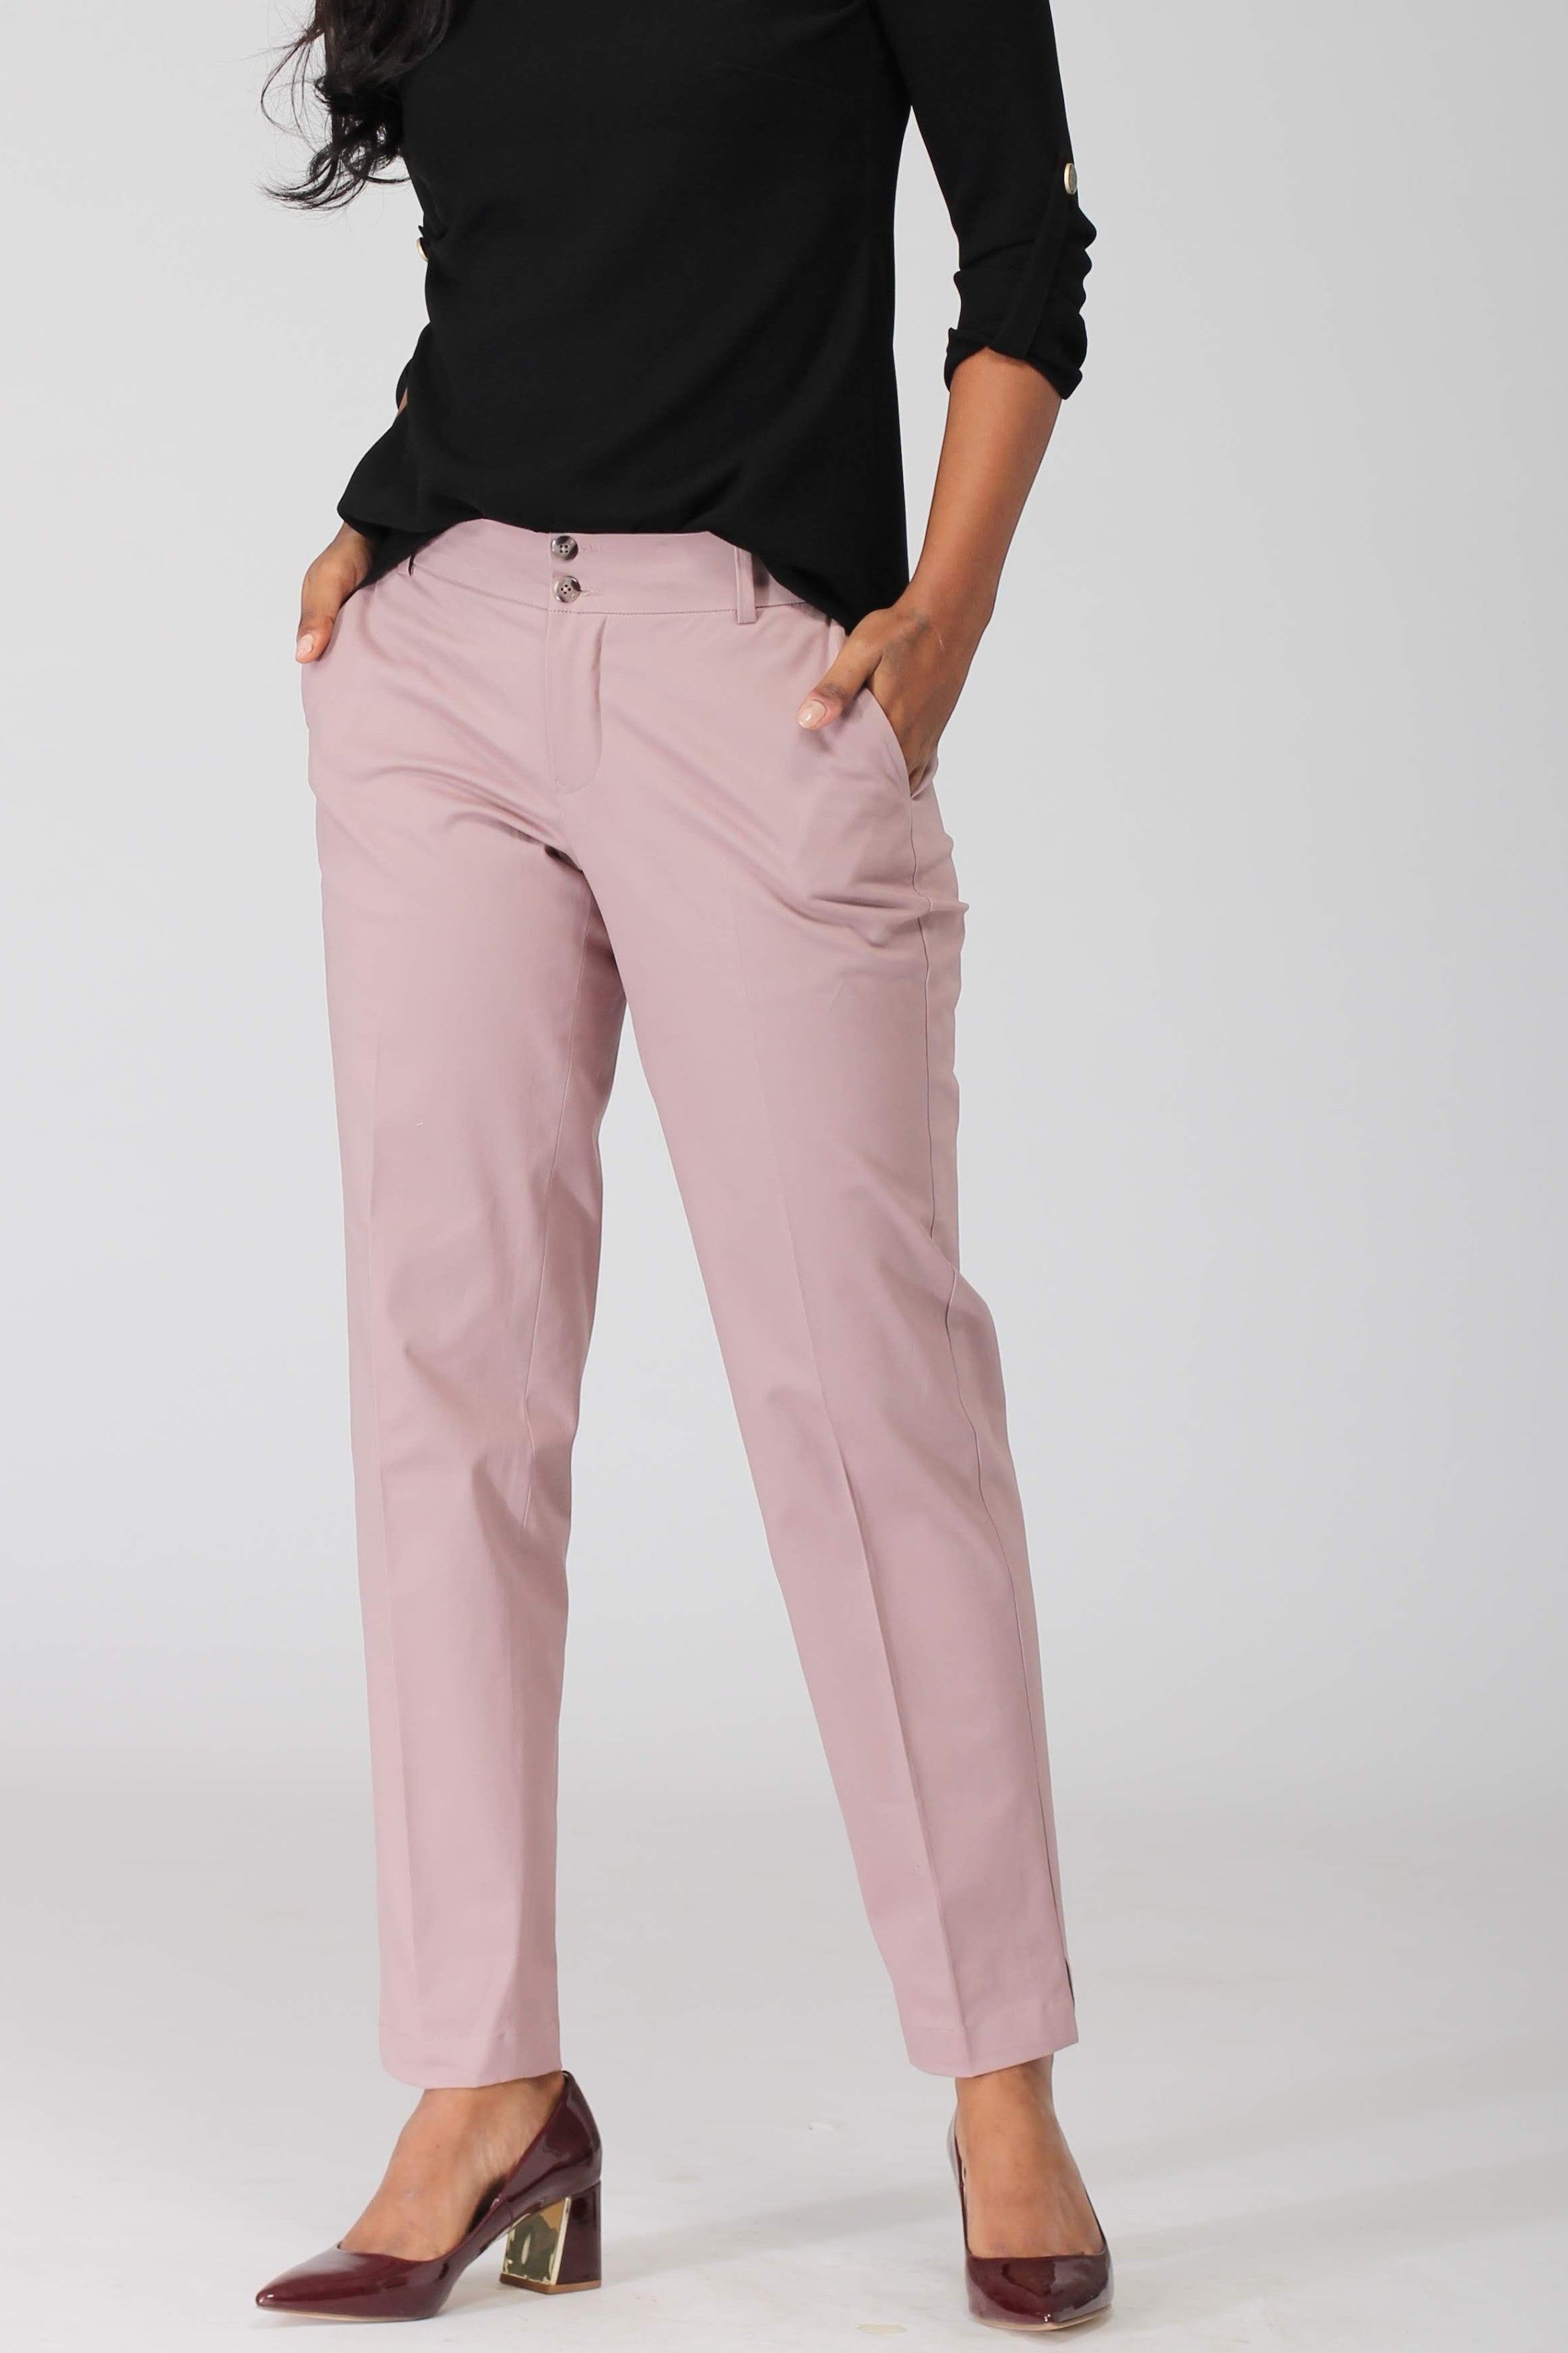 Buy Rinascimento Women Pink Casual Trousers Online  668065  The Collective